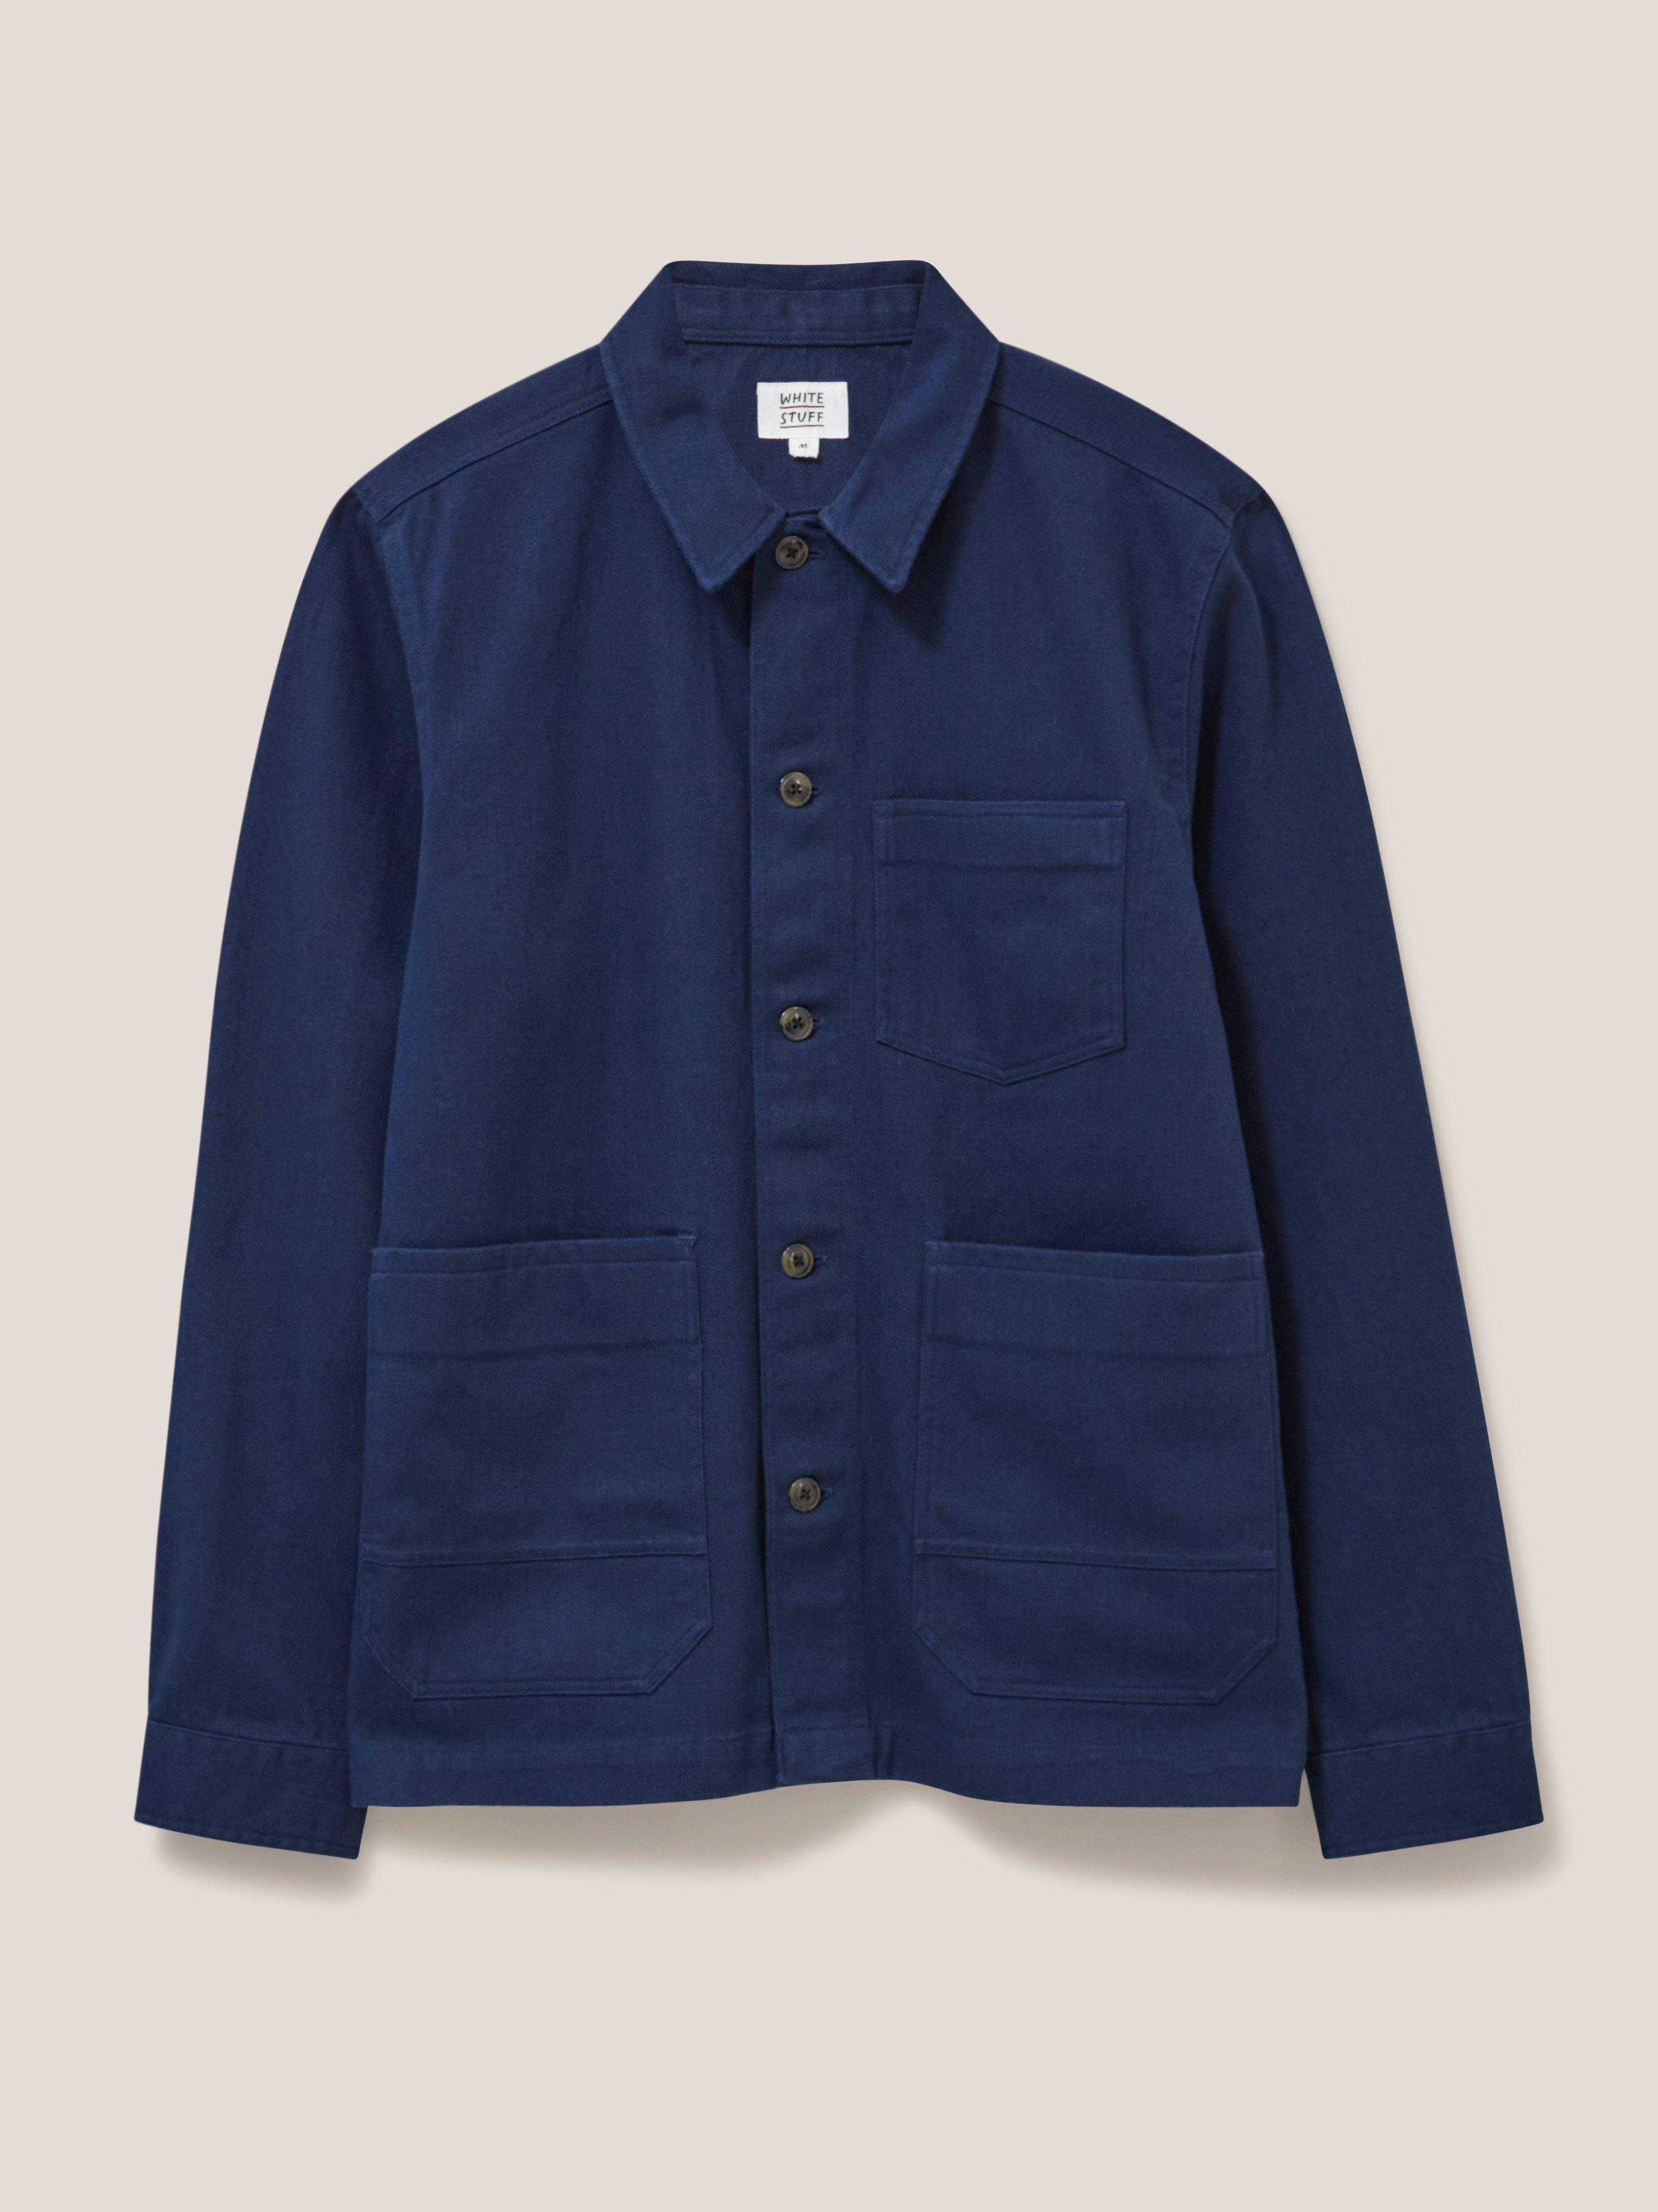 Fabien Chore Jacket in FRENCH NAVY - FLAT FRONT